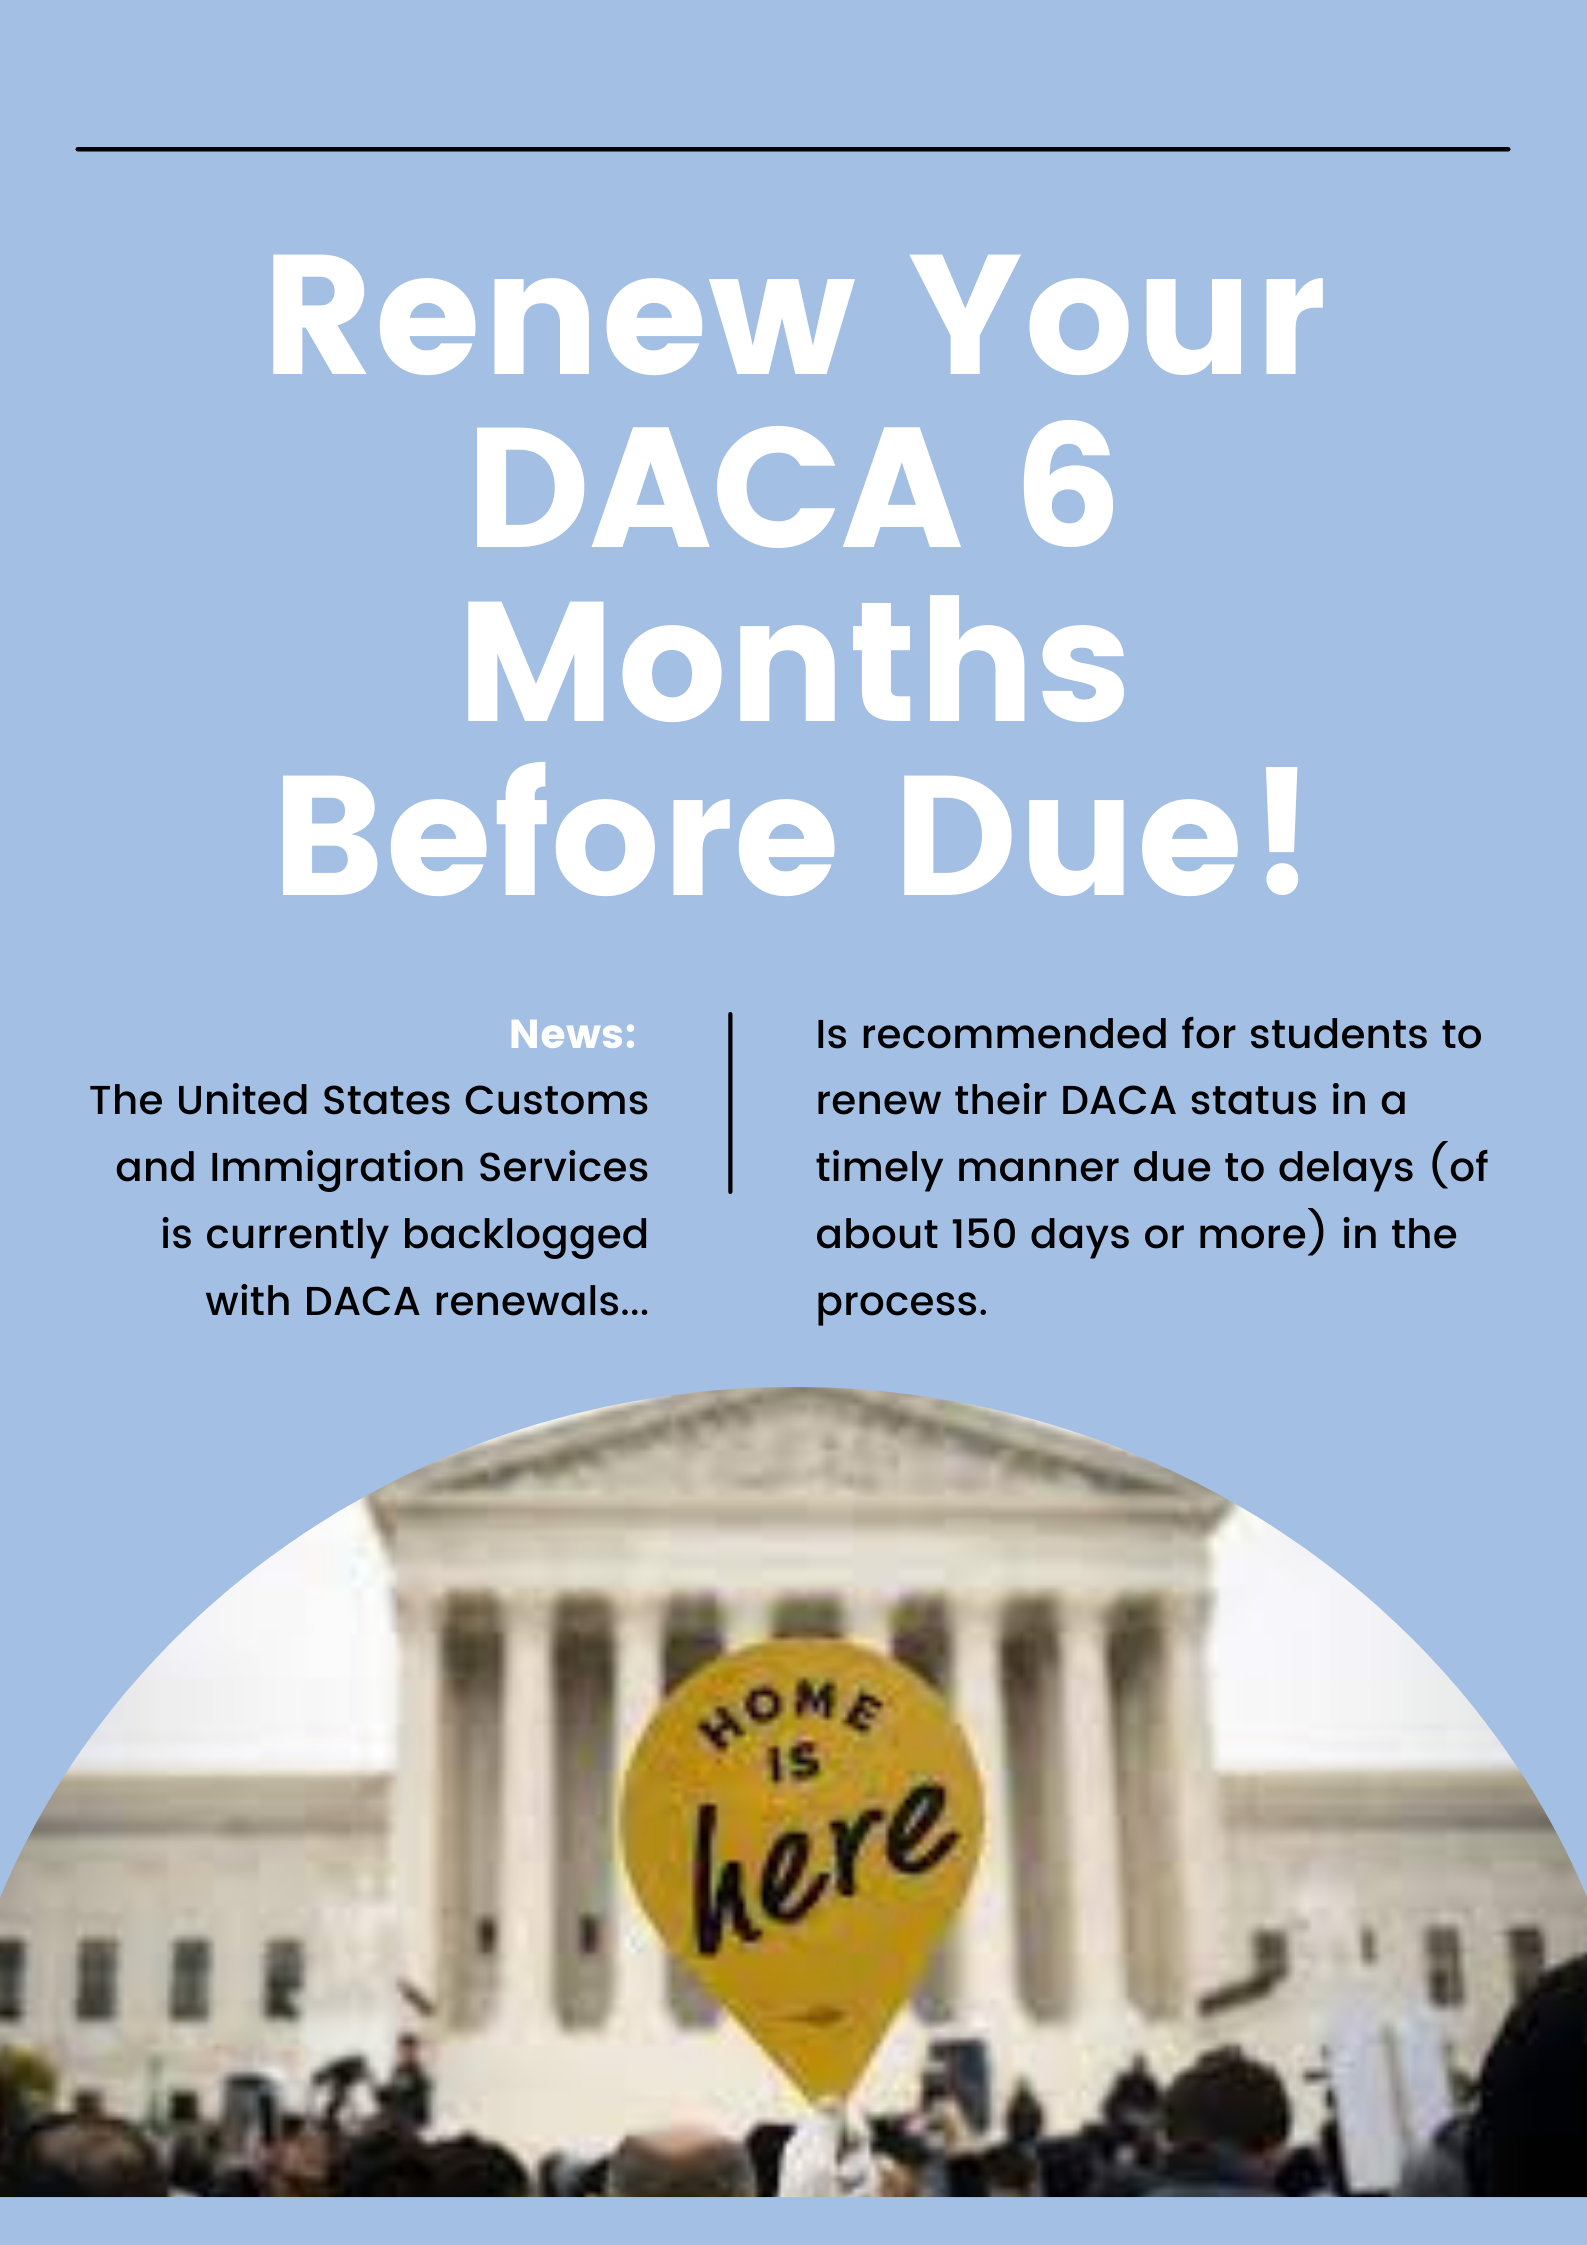 Renew Your DACA ASAP Services for Undocumented Students